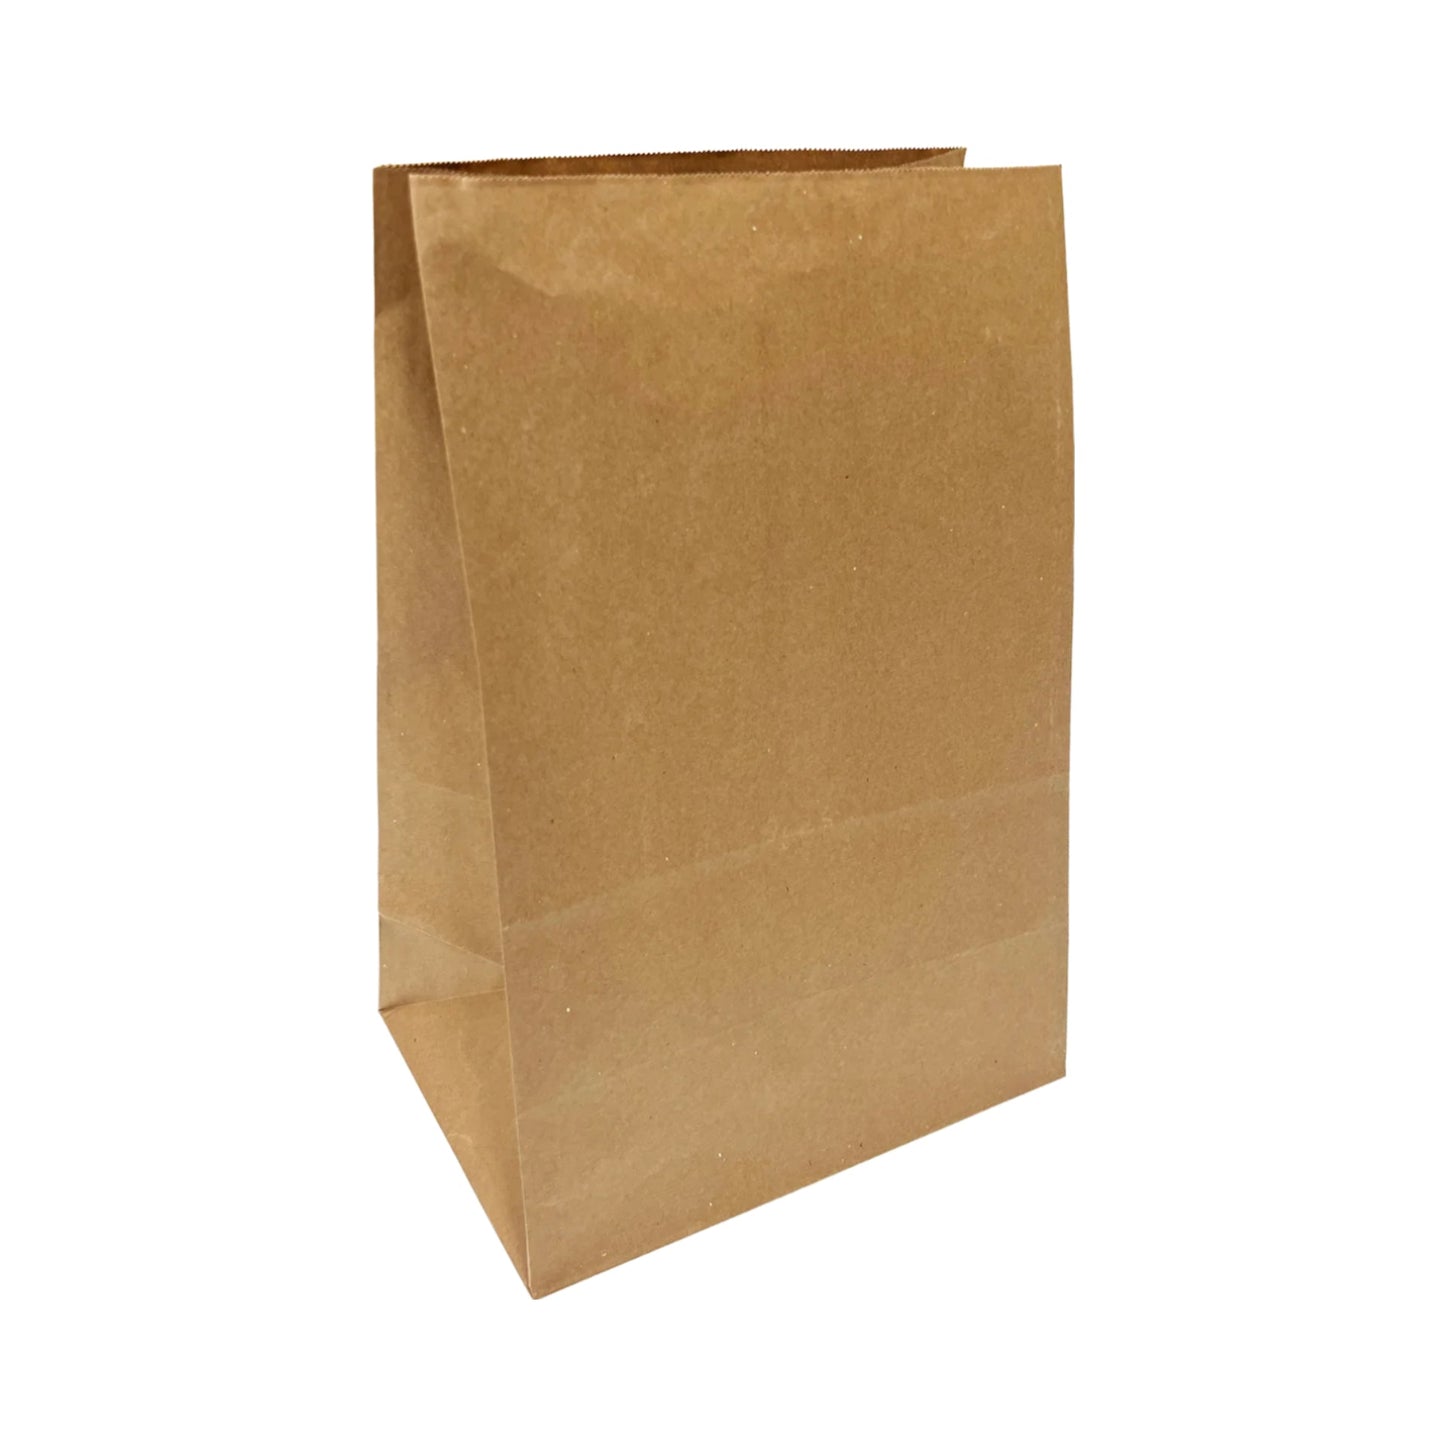 500pcs #10 Grocery Bags 6.8x3.6x12.5 inches; $0.067/pc